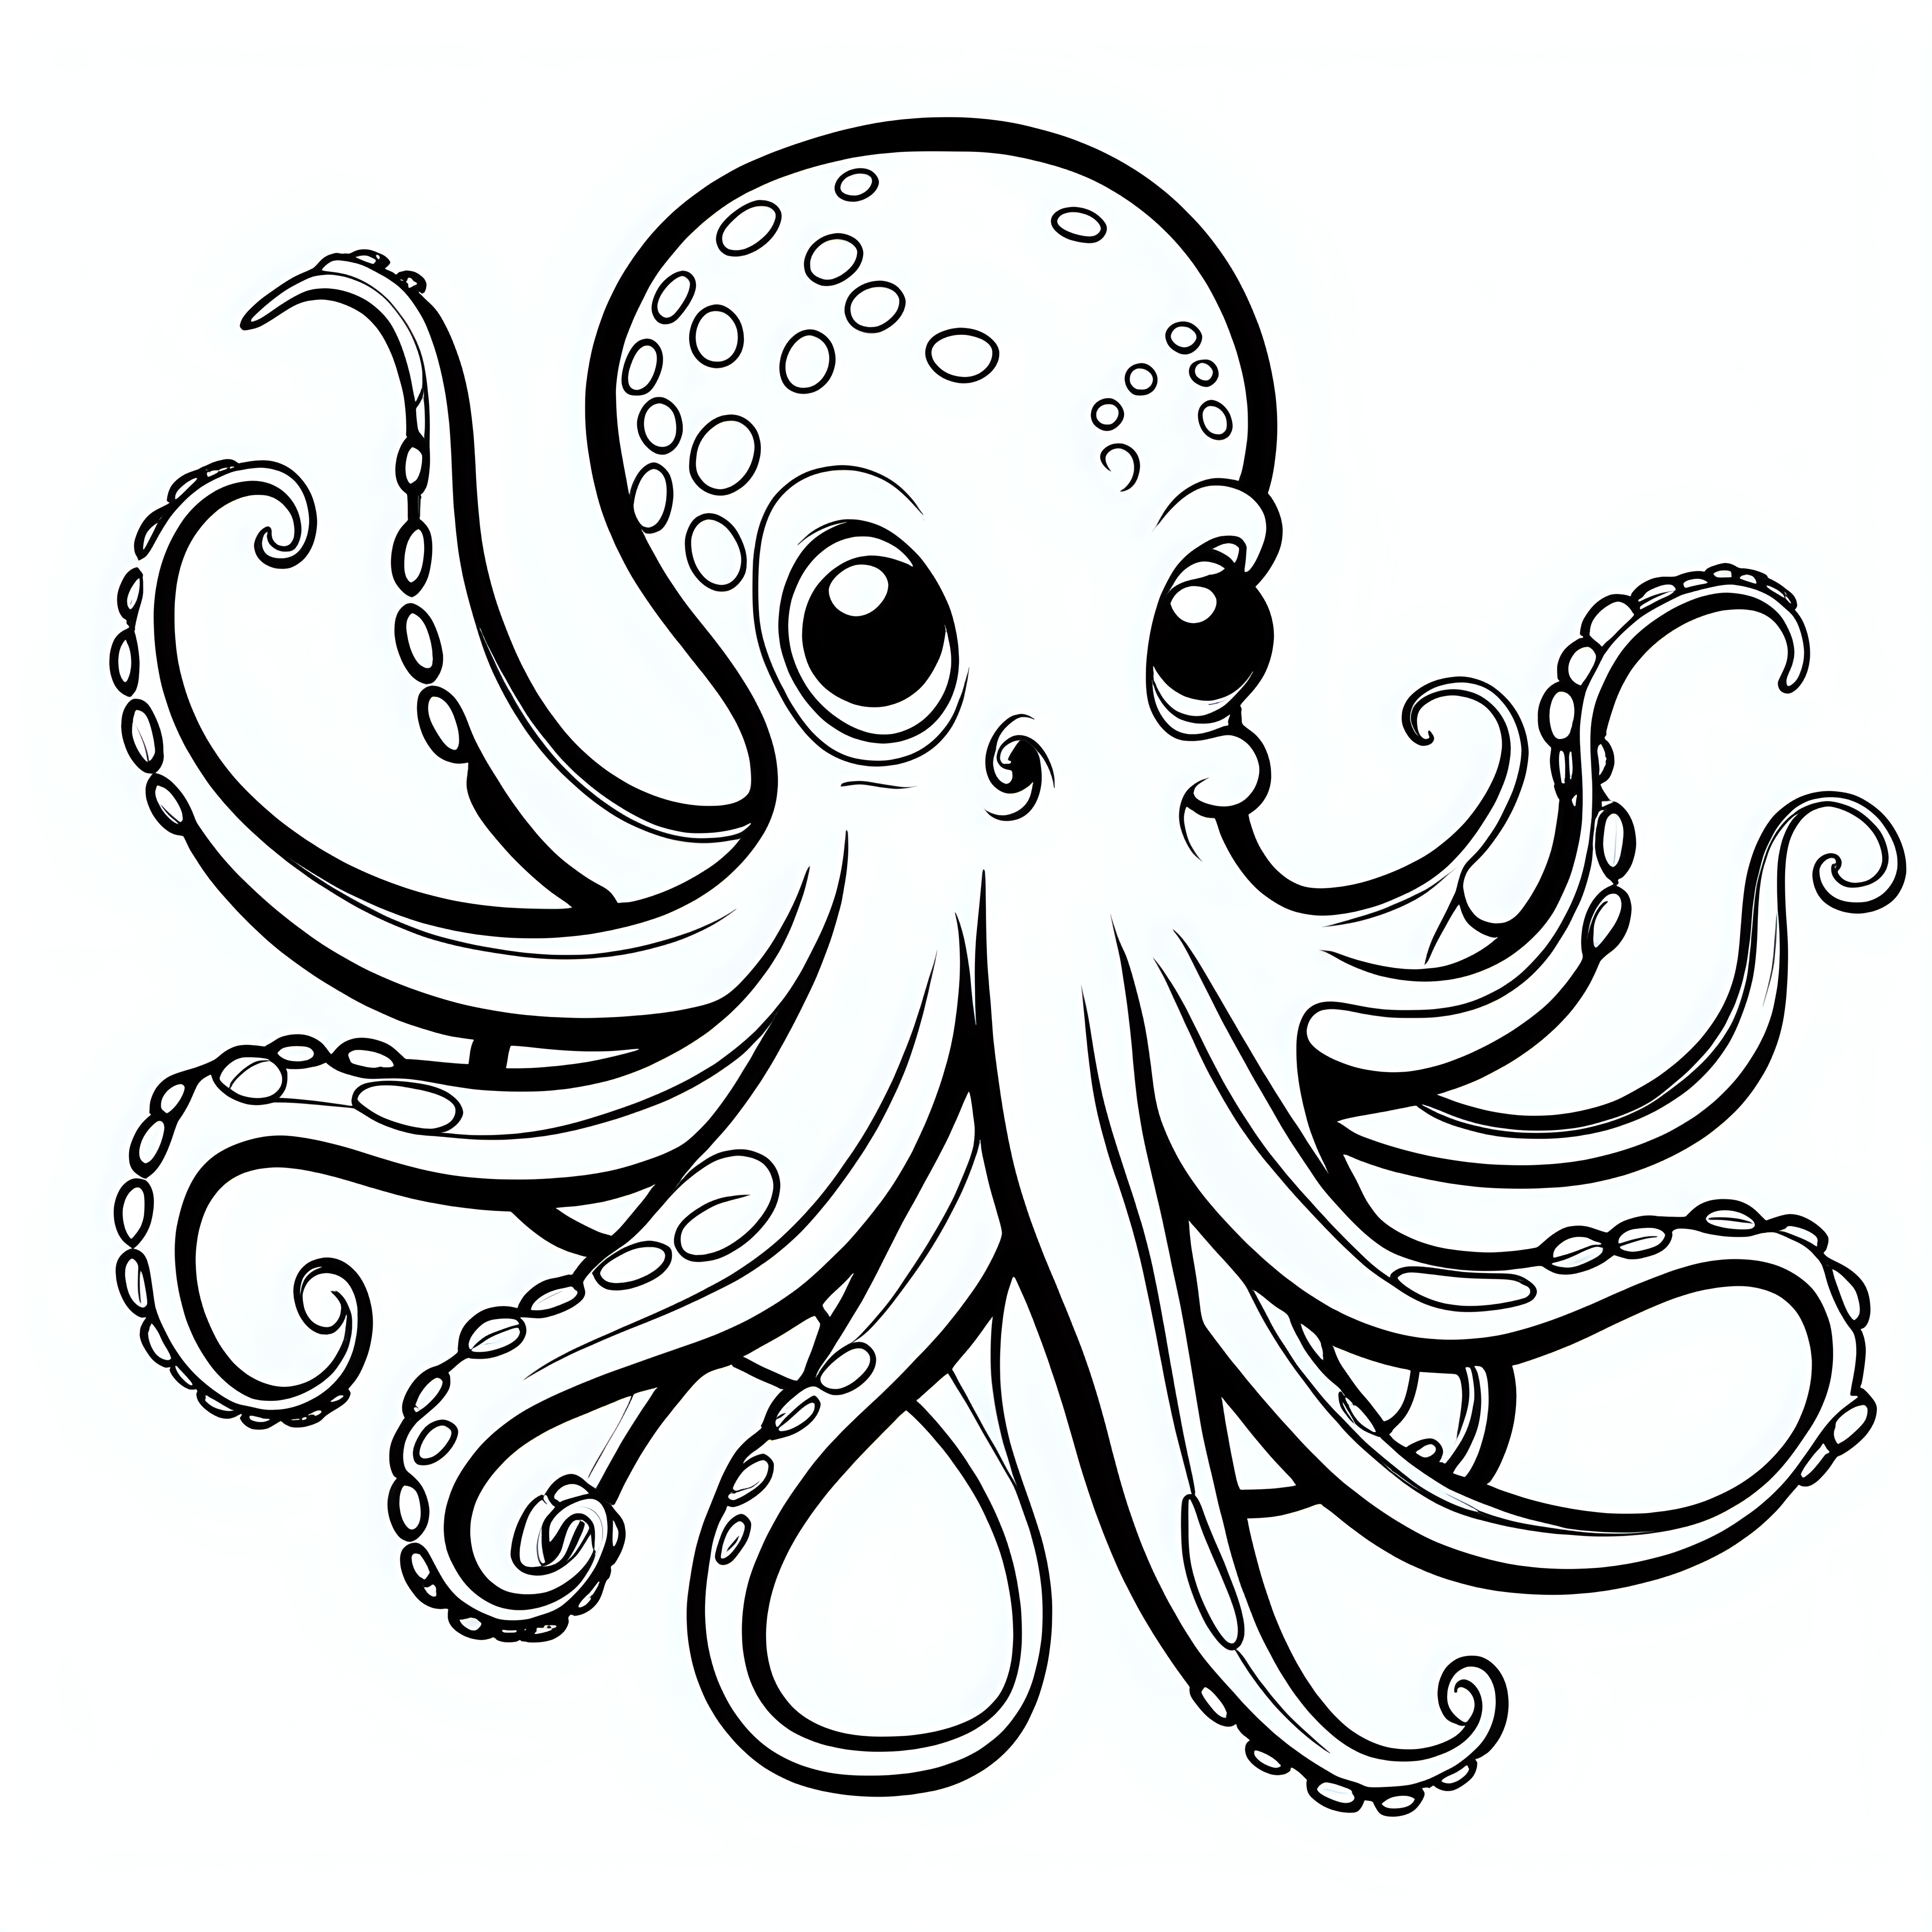 draw a octopus with only the outline  for a coloring book